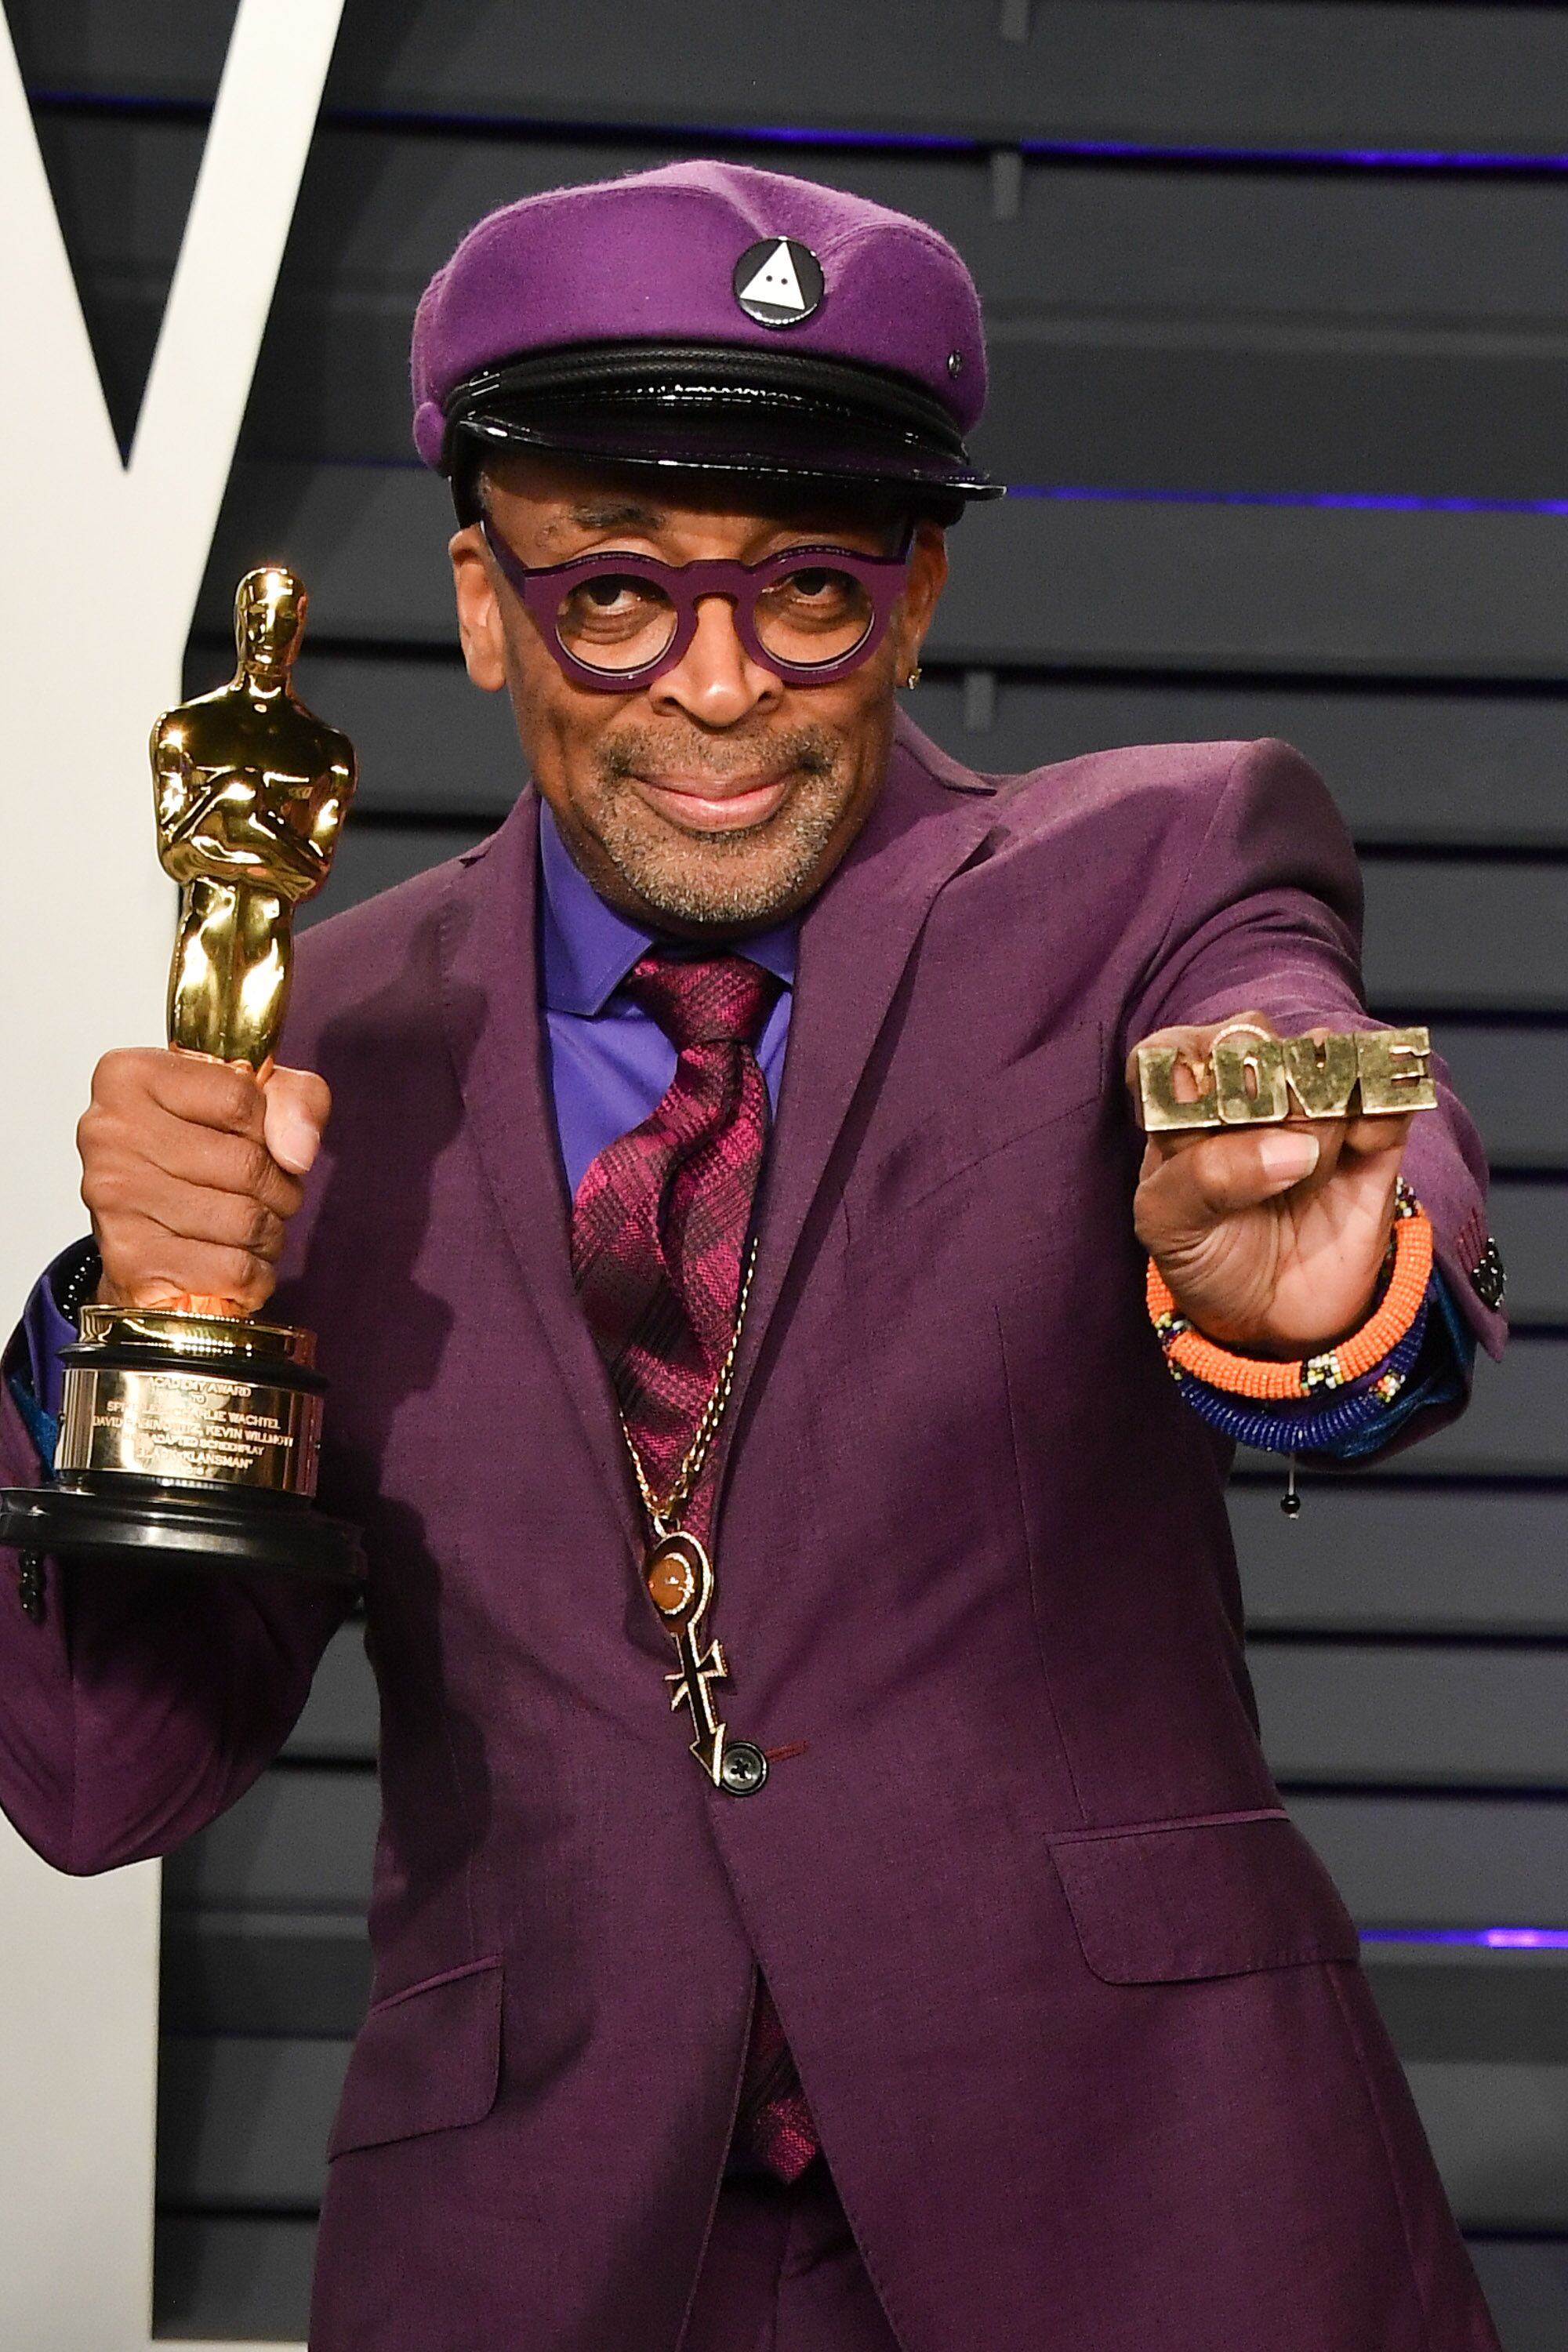 Spike Lee holding up his Oscar award for Best Director at the 2019 Academy Awards | Photo: Getty Images